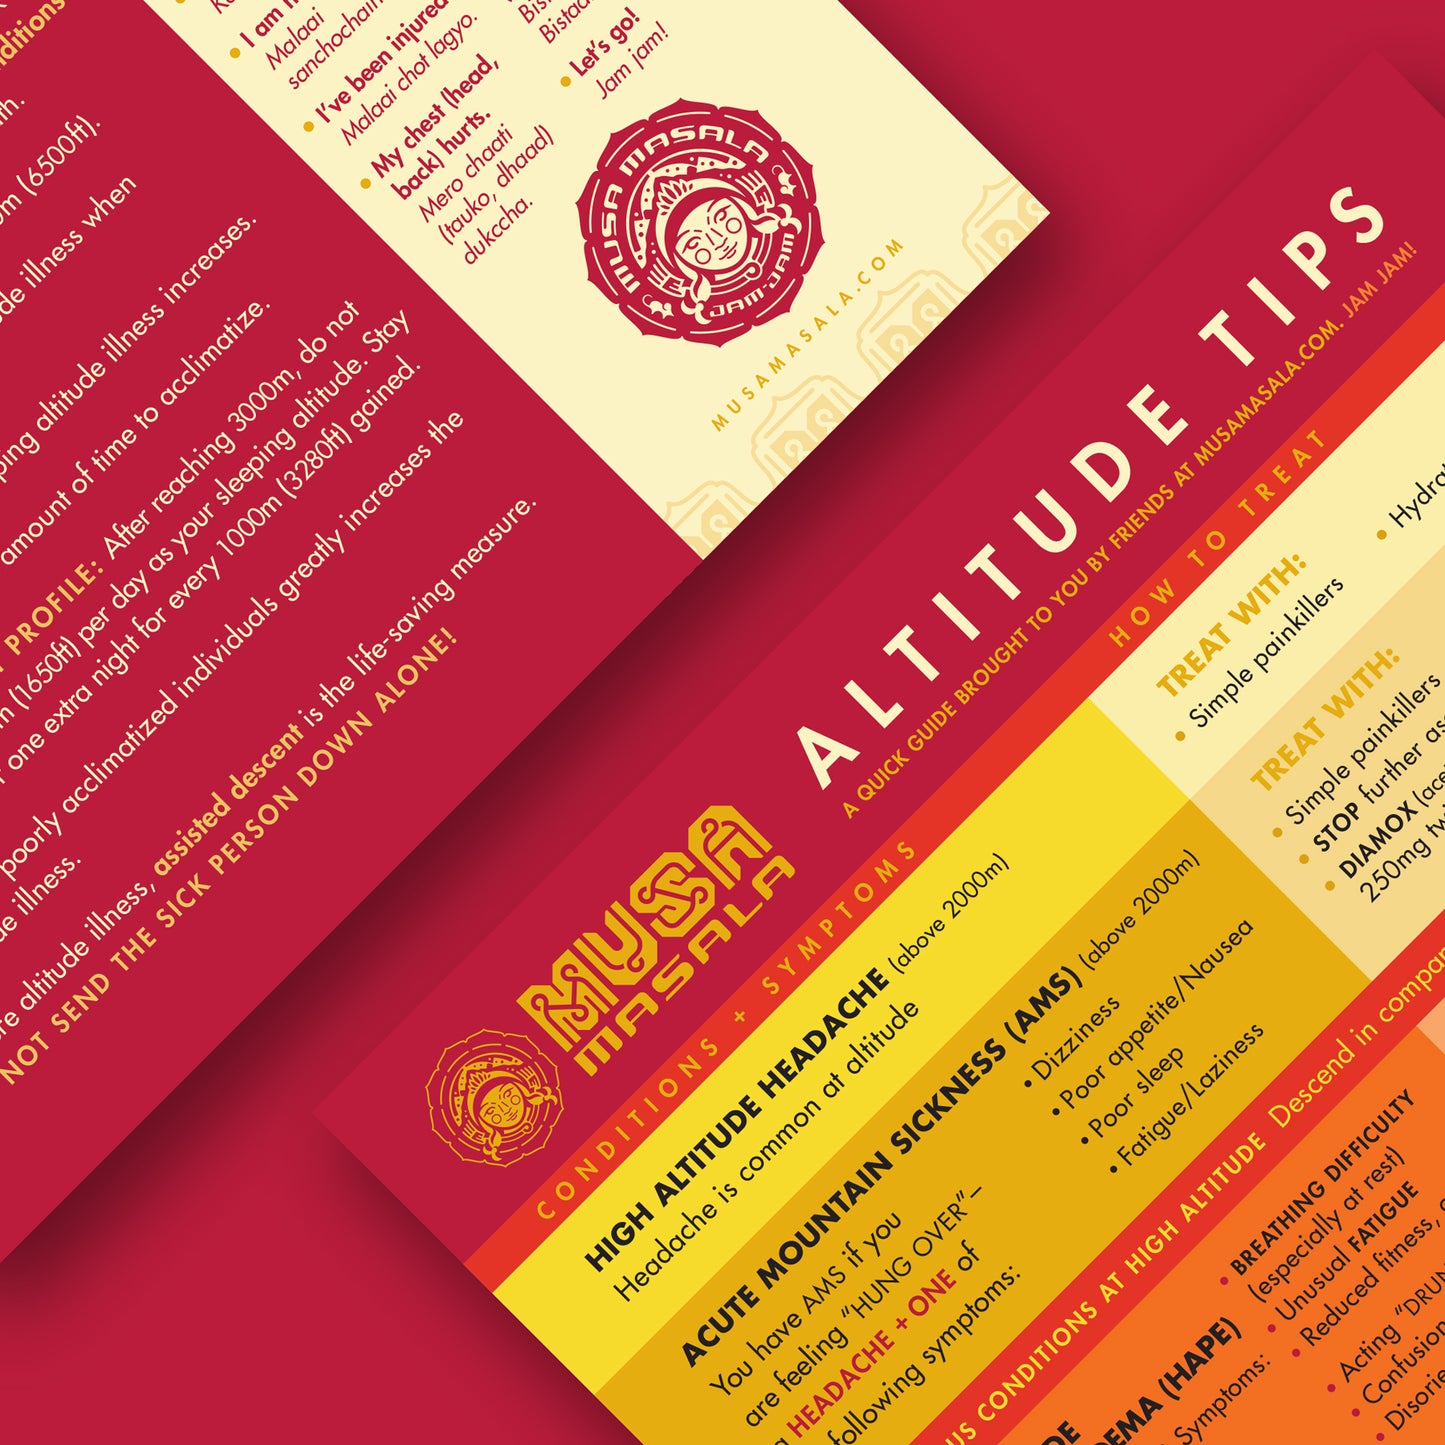 Musa Masala Tips Cards: Altitude, Hypothermia, Heat Illness & Lost, Not Lost (4-pack)